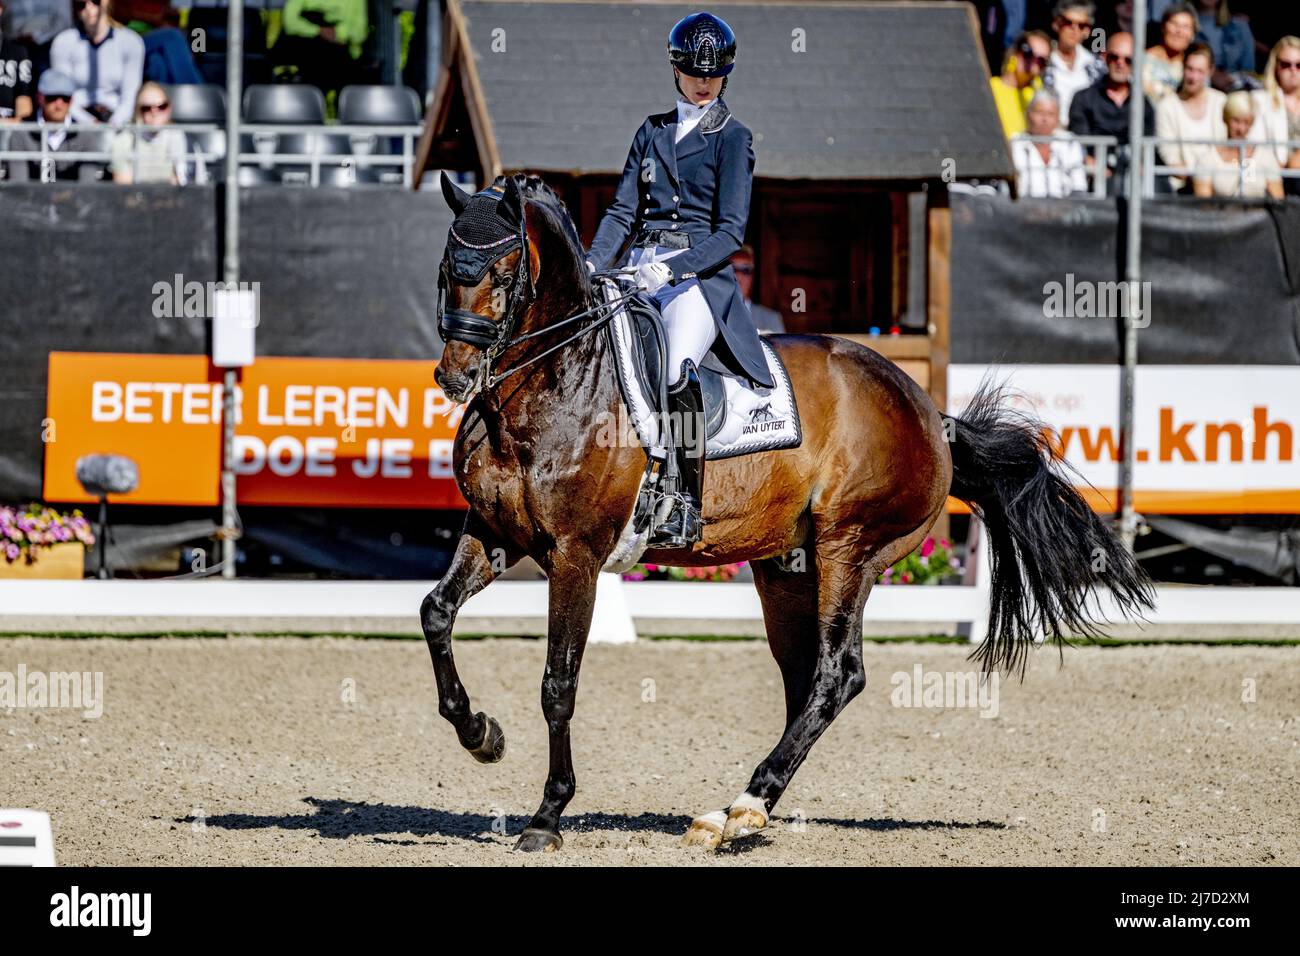 Ermelo, The Netherlands, 2022-05-08 16:59:14 ERMELO - Dinja van Liere and Hermès became champion during the Dutch dressage championship. ANP ROBIN UTRECHT netherlands out - belgium out Stock Photo